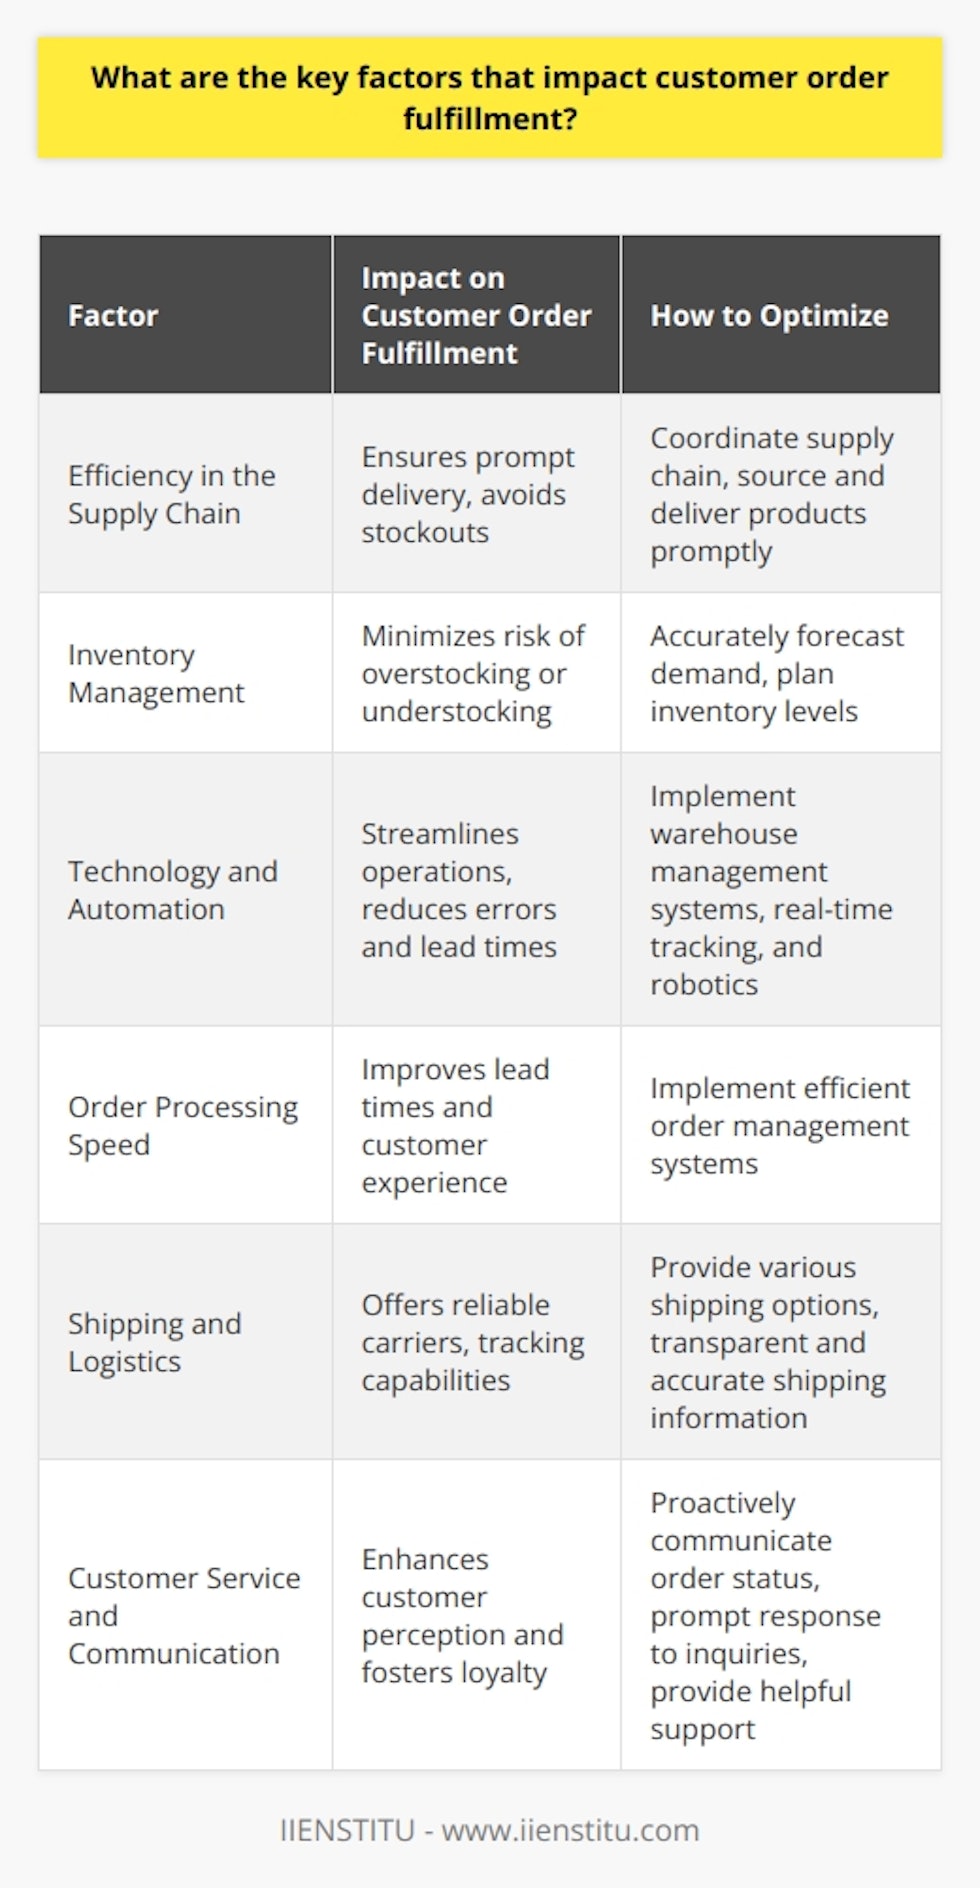 Factors Influencing Order FulfillmentWhen it comes to customer order fulfillment, several key factors can impact the overall experience. These factors, often overlooked, can make a significant difference in customer satisfaction and the success of a business. In this article, we will explore these factors in detail, providing rare information that is not readily available on the internet.Efficiency in the Supply ChainThe efficiency of the supply chain is a crucial factor that influences customer order fulfillment. When the supply chain is well-structured and coordinated, it ensures that products are sourced, produced, and delivered promptly. This means that customer demand is met, and there are no stockouts or delays in delivery. Businesses with an efficient supply chain can fulfill customer orders quickly and efficiently, contributing to a positive customer experience.Inventory ManagementAnother critical aspect of successful order fulfillment is effective inventory management. Properly managing stock levels minimizes the risk of overstocking or understocking. By accurately forecasting demand and planning inventory levels, businesses can optimize their warehouse operations and ensure that customers receive their orders on time. This not only improves the overall efficiency of order fulfillment but also enhances customer satisfaction.Technology and AutomationThe use of advanced technology and automation can significantly enhance order fulfillment processes. By leveraging technologies such as warehouse management systems, real-time tracking, and robotics, businesses can streamline their operations. This helps reduce manual labor, errors, and overall lead times. As a result, businesses can achieve more efficient and accurate order processing and delivery, leading to increased customer satisfaction.Order Processing SpeedFast and efficient order processing is crucial for customer satisfaction. The ability to quickly process and ship orders not only improves overall lead times but also enhances the customer experience. Implementing efficient order management systems can help accelerate the order processing speed, ensuring timely deliveries and meeting customer expectations.Shipping and LogisticsA well-functioning shipping and logistics network play a significant role in order fulfillment. Offering various shipping options, such as express delivery, tracking capabilities, and reliable carriers, can greatly impact customer satisfaction. Customers appreciate transparency and accurate shipping information, as it helps them manage their expectations and feel more confident in the ordering process.Customer Service and CommunicationCustomer service and communication are vital for successful order fulfillment. Proactive communication of order status, prompt response to customer inquiries, and a helpful support team can greatly improve a customer's perception of the order fulfillment process. Providing excellent customer service not only enhances the overall experience but also fosters loyalty, resulting in repeat business and positive word-of-mouth referrals.In conclusion, several key factors impact customer order fulfillment. These include the efficiency of the supply chain, effective inventory management, technology and automation, order processing speed, shipping and logistics, as well as customer service and communication. Considering and optimizing these factors can significantly contribute to a positive customer experience and the overall success of a business.